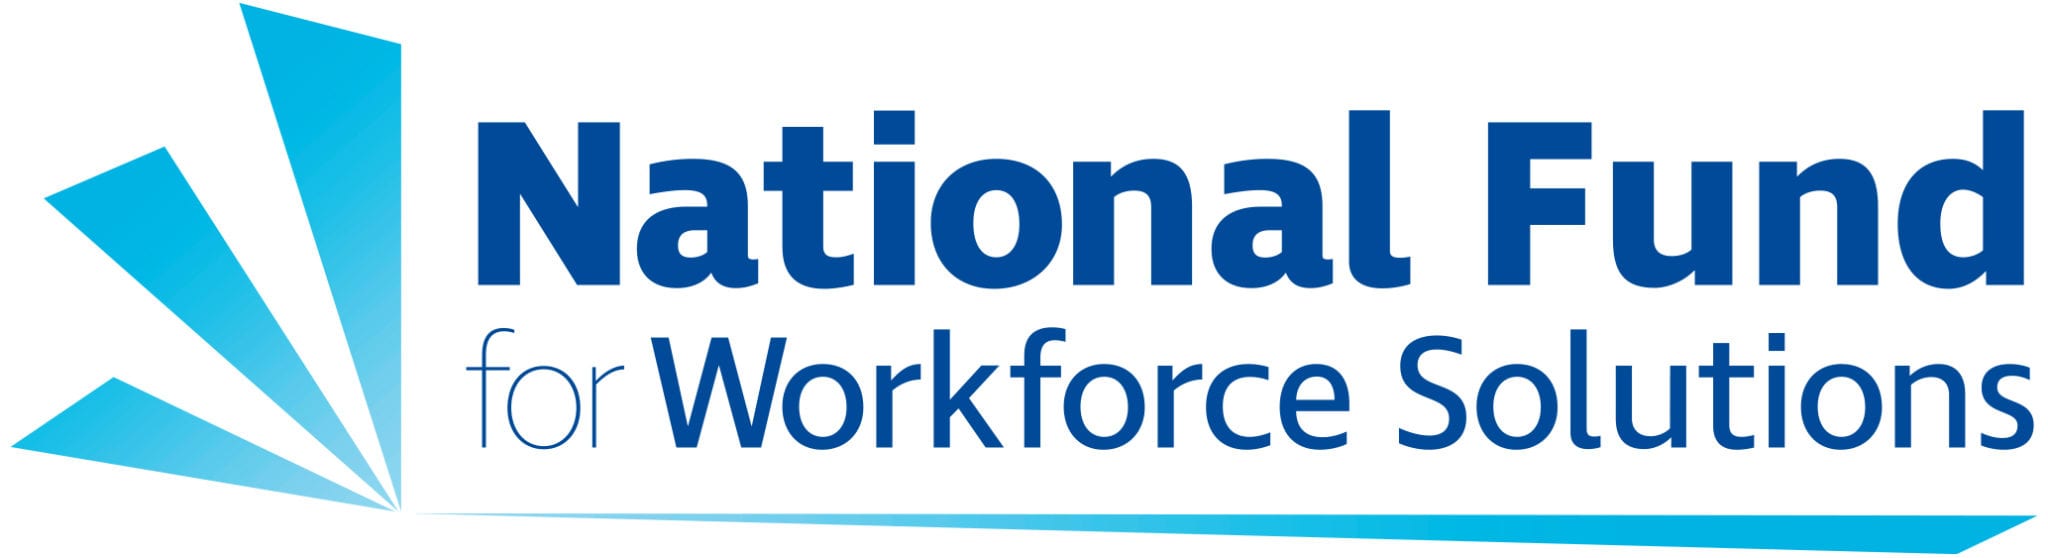 National Fund for Workforce Solutions Logo